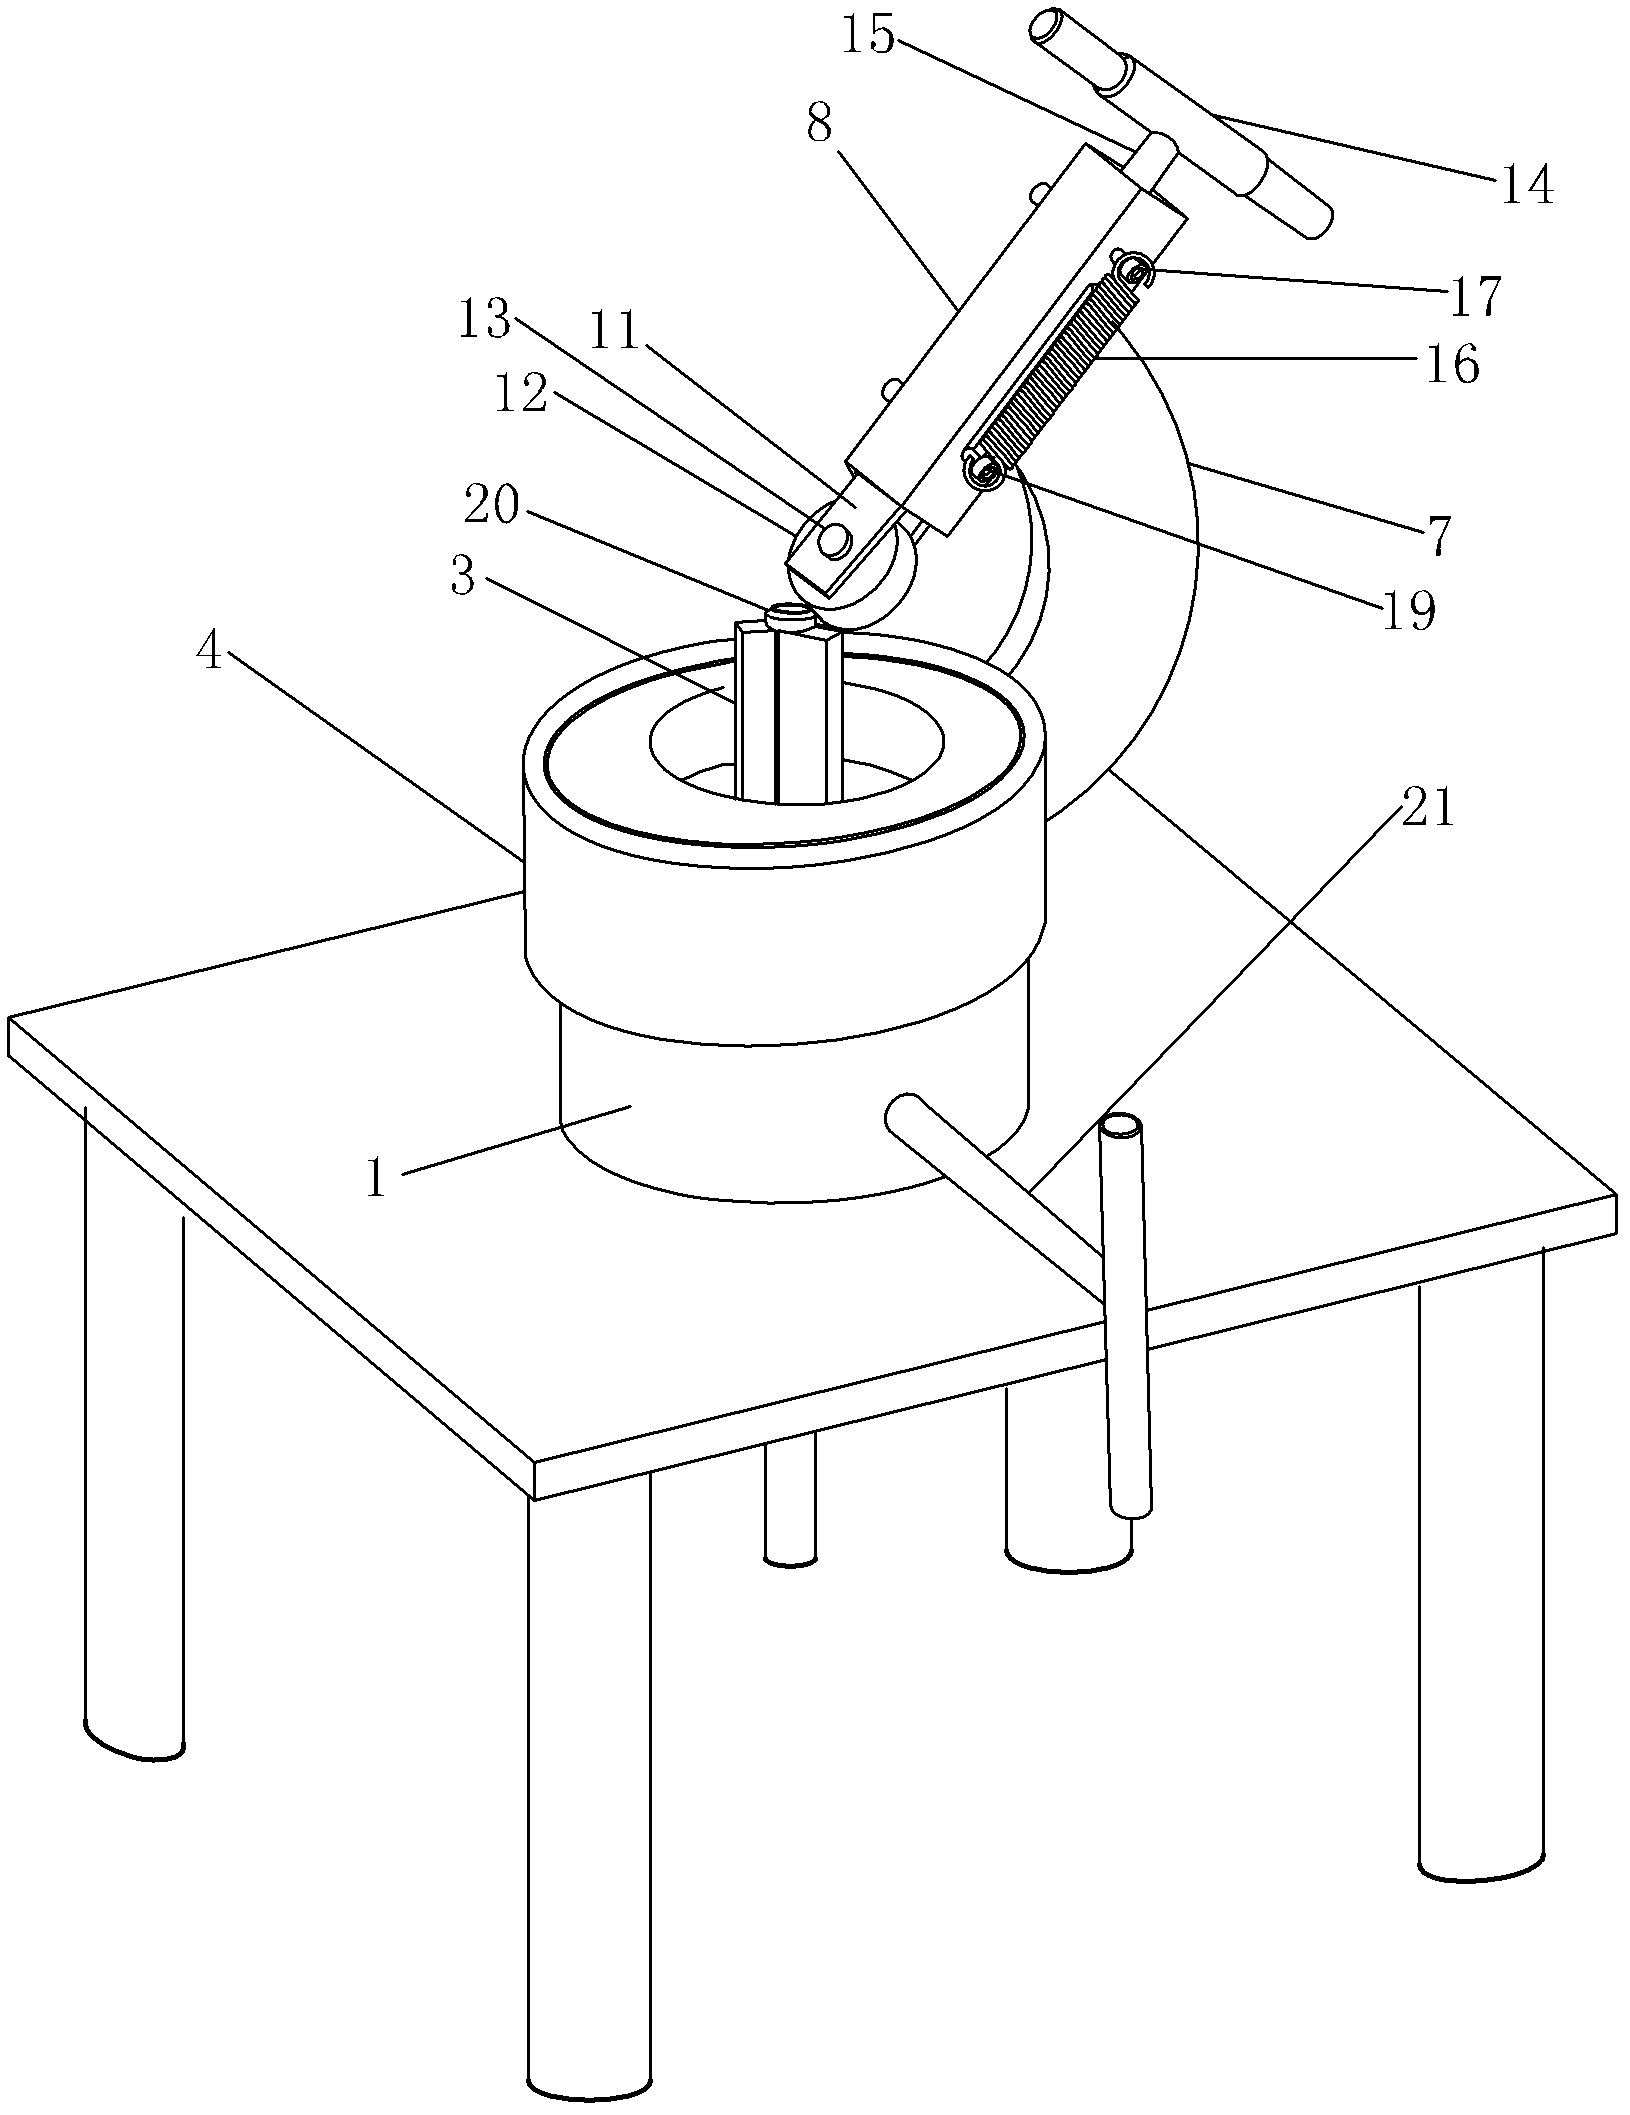 Semiautomatic pipe reducing device